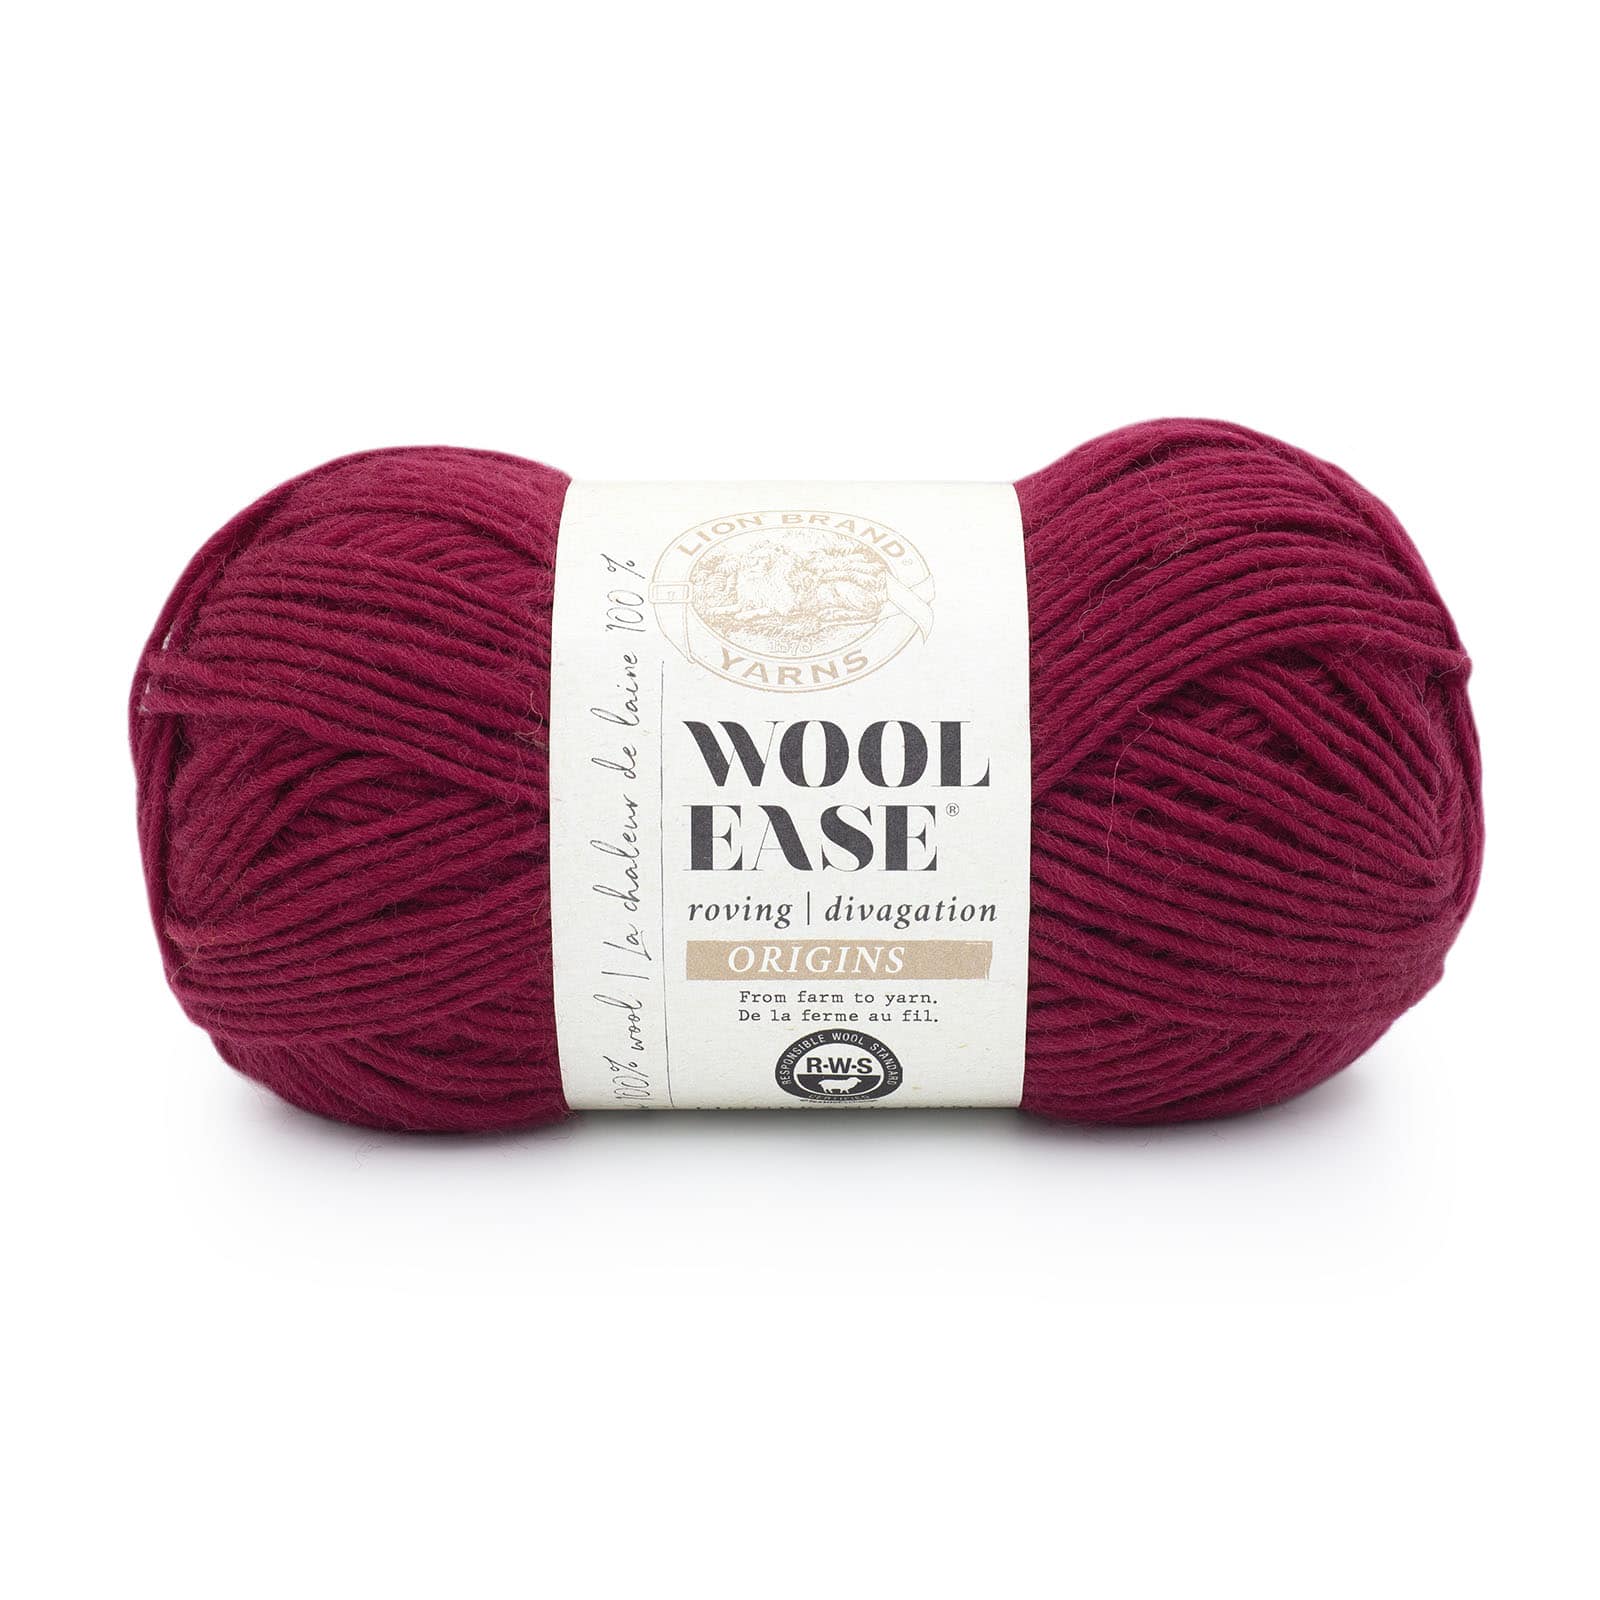 Lion Brand Wool-Ease Yarn -Succulent, 1 count - Foods Co.